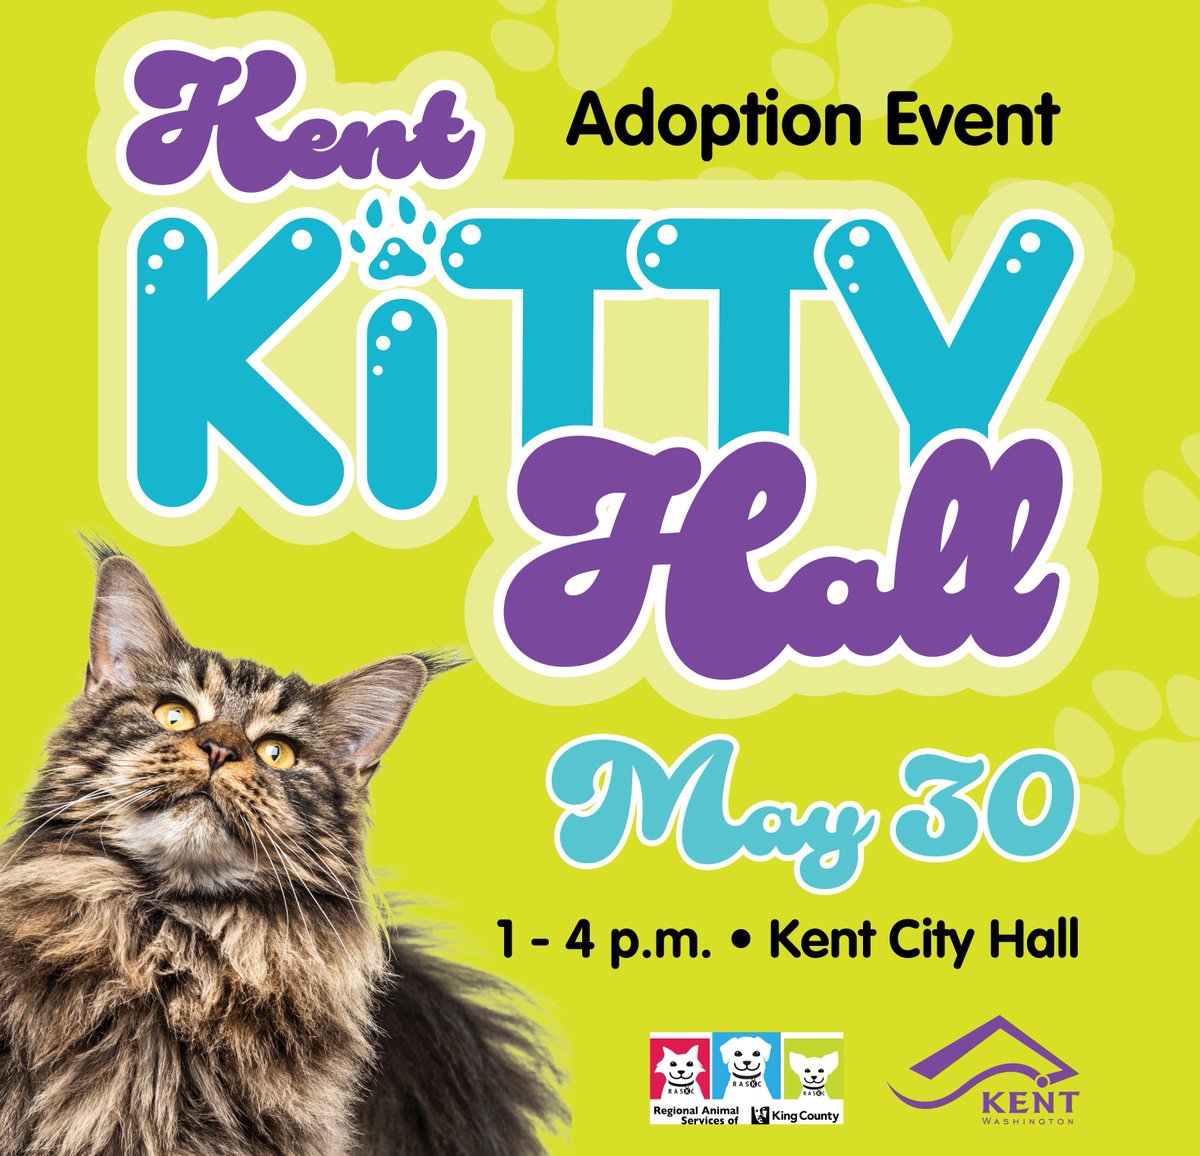 We are making Kent City Hall, Kent Kitty Hall! It's where all the cuddliest, cutest adoptable kittens and cats will be available for adoption thanks to RASKC! This is a purr-fect time, to find your furever friend! 📅 Thursday, May 30 ⌚ 1 p.m. - 4 p.m. 📍 Kent City Hall